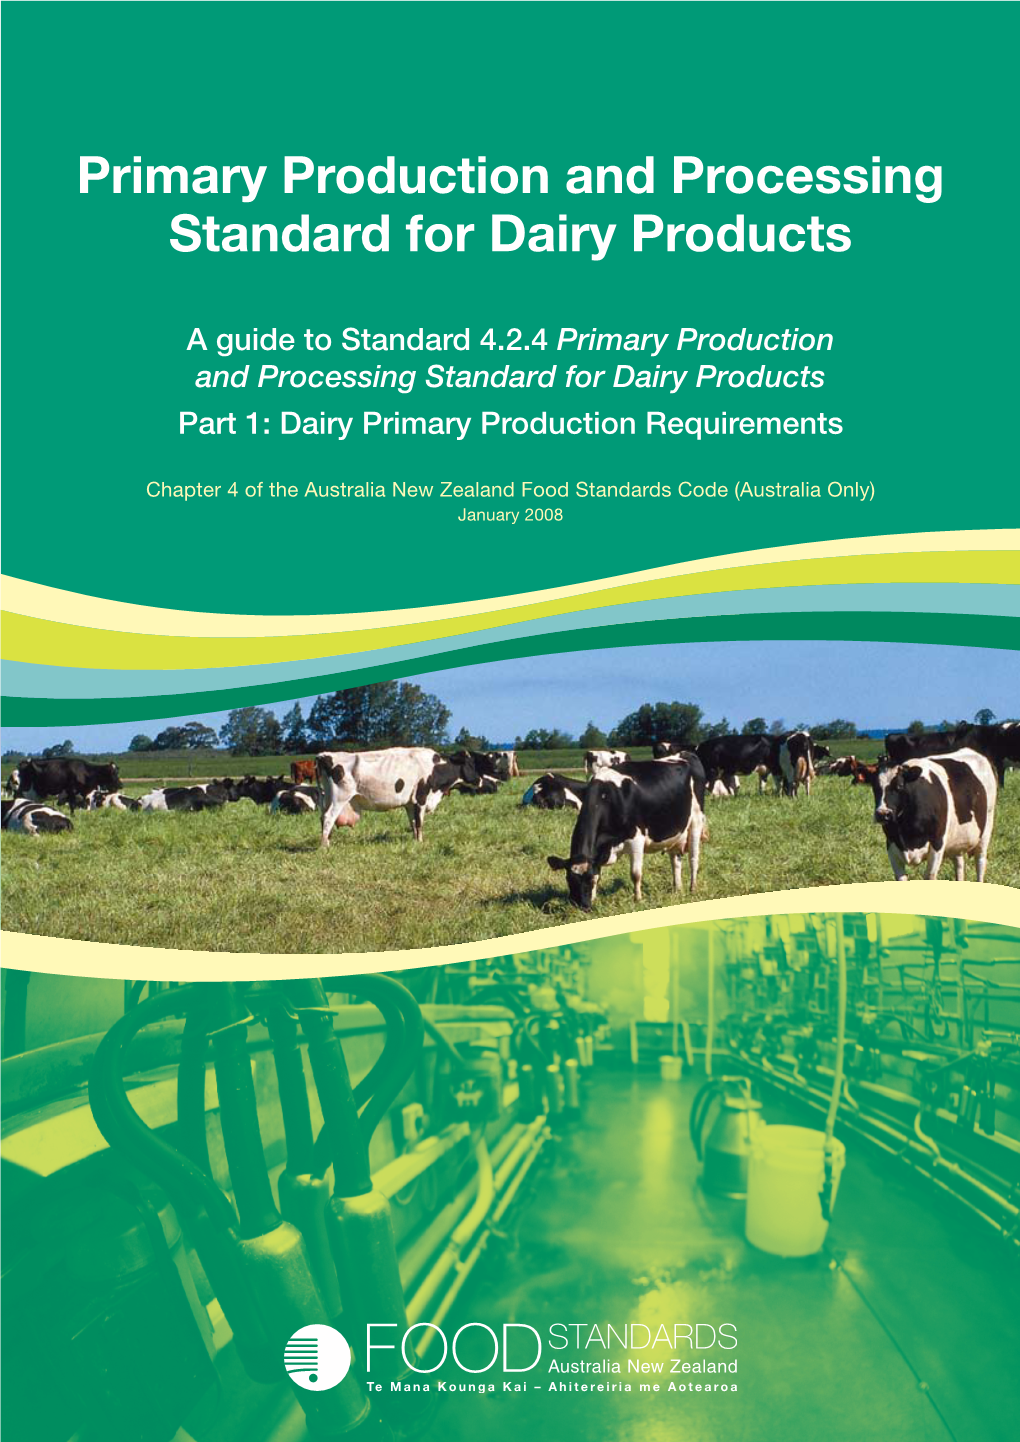 Primary Production and Processing Standard for Dairy Products